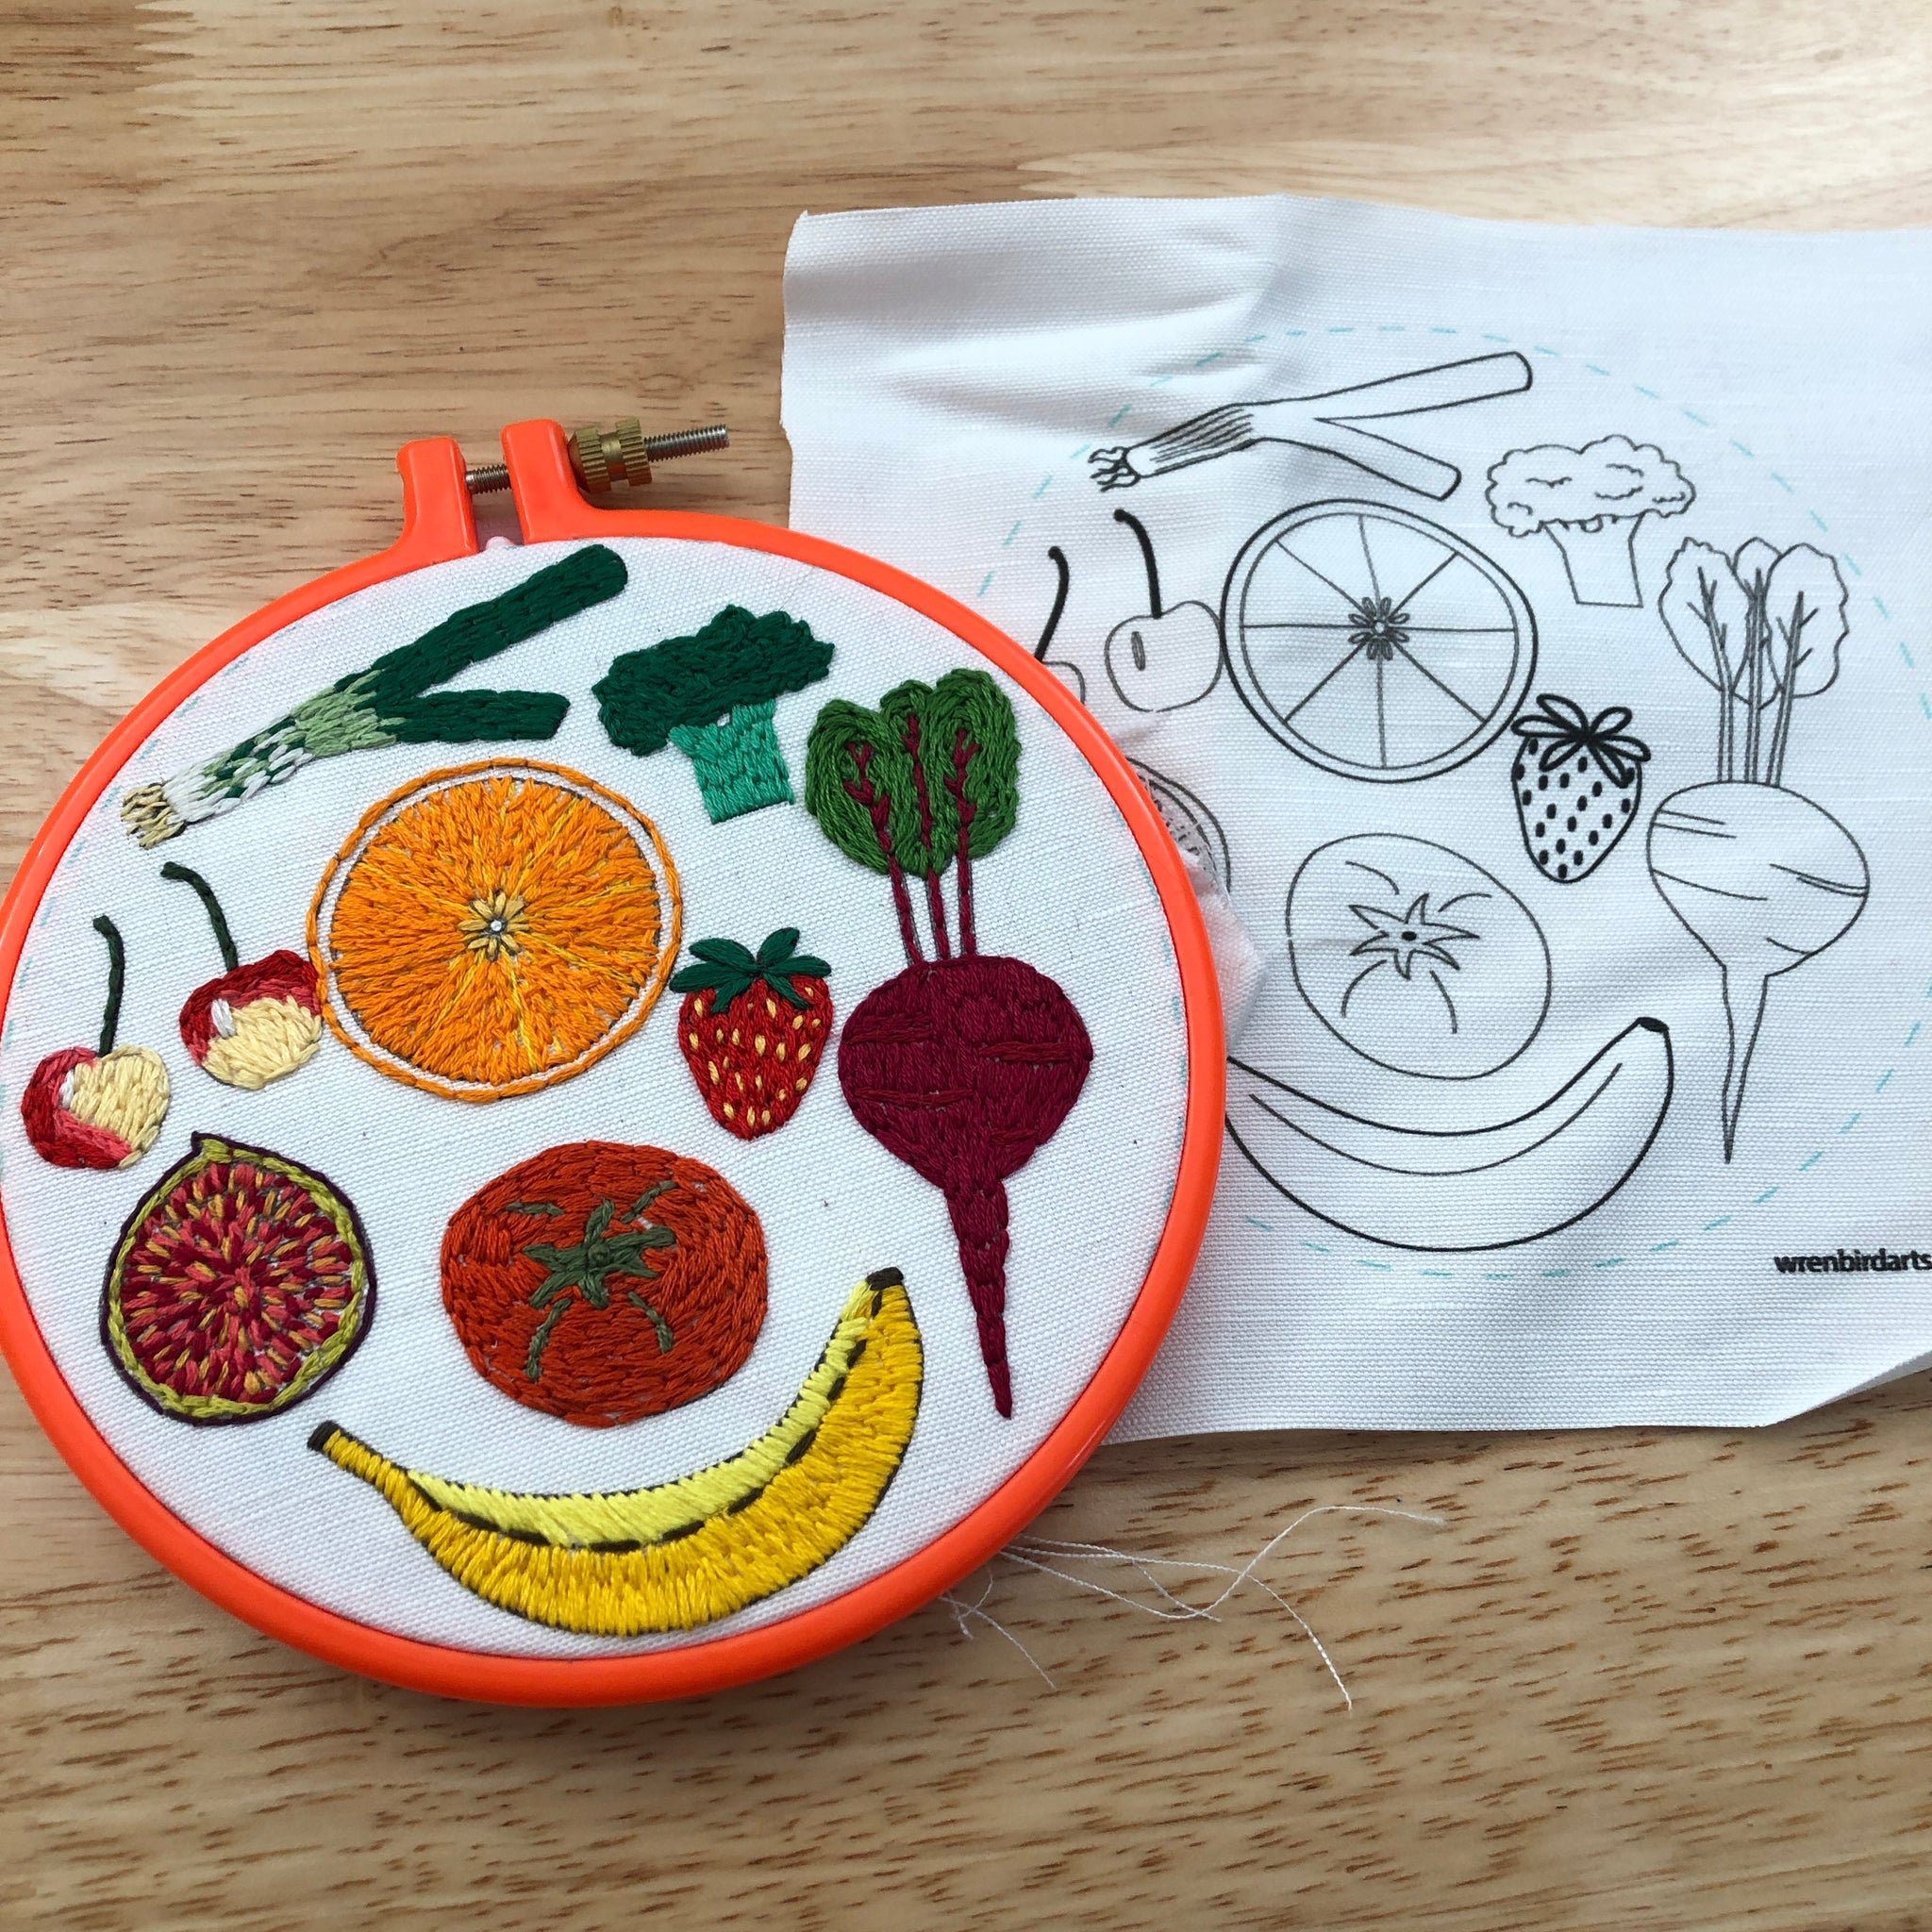 Fruits and Vegetables Embroidery Transfers – wrenbirdarts